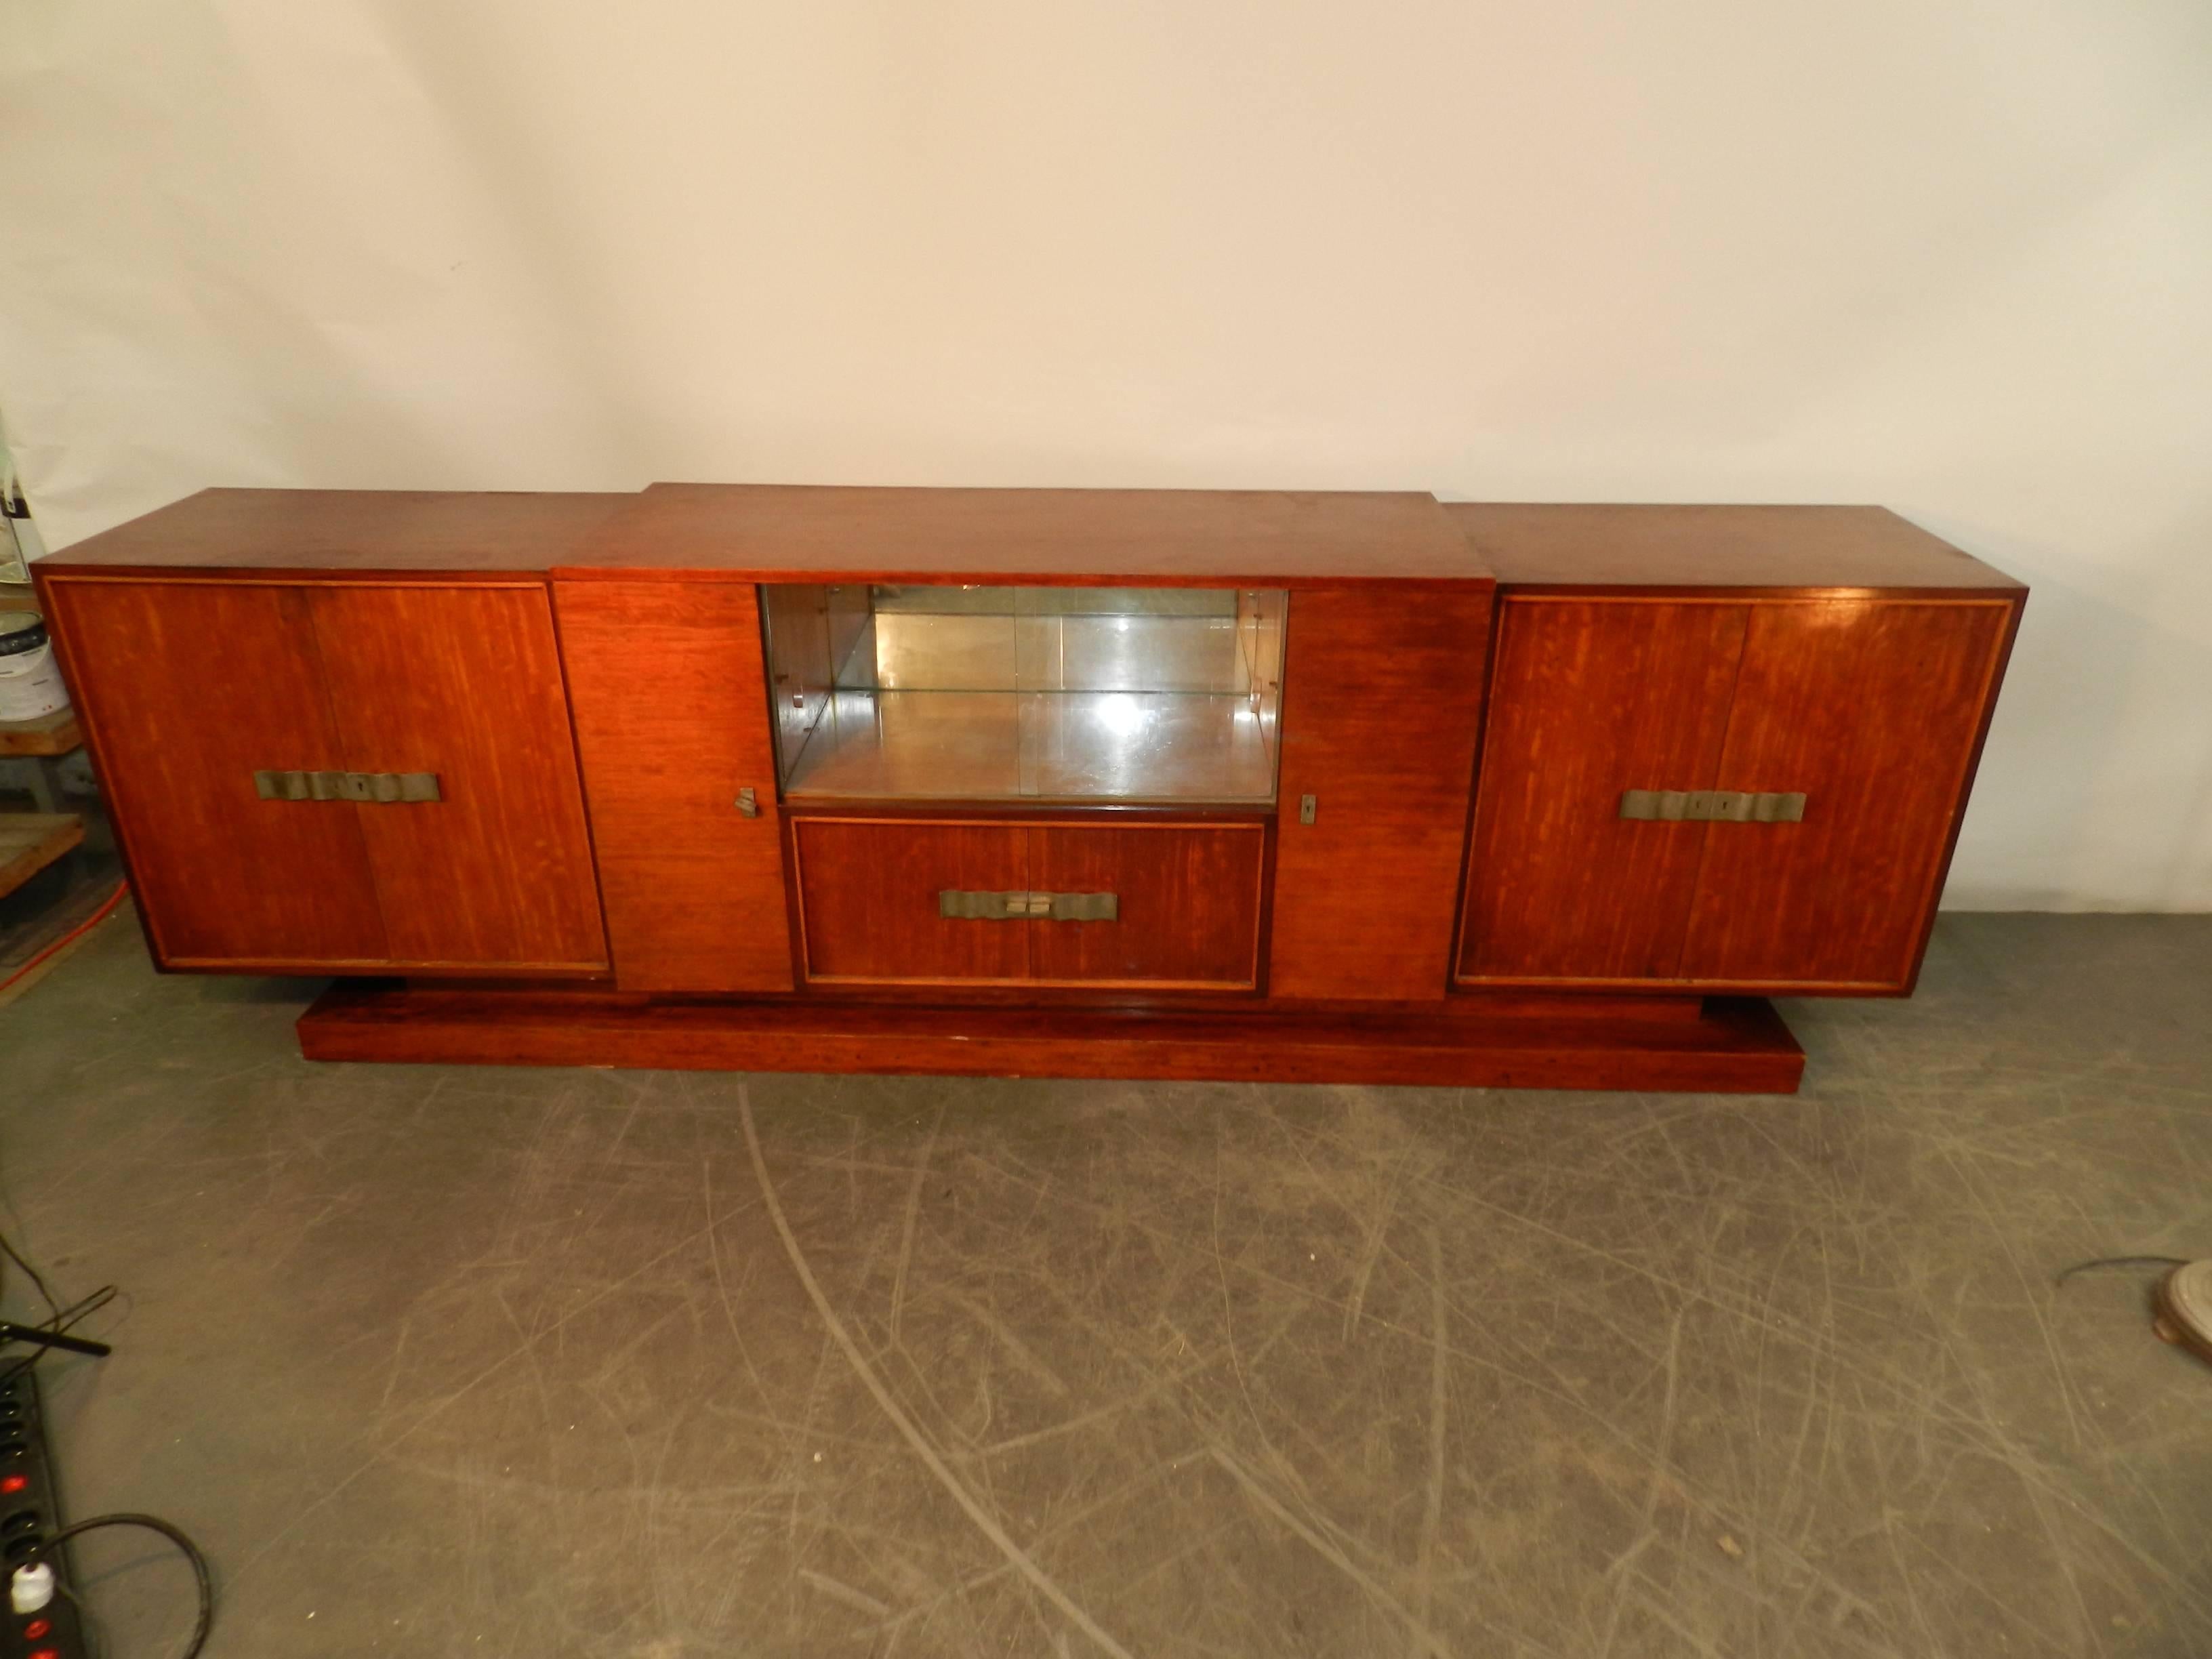 Decoene Freres, Large Art Deco Sideboard in MOVINGUI MOIRE , circa 1930 For Sale 1